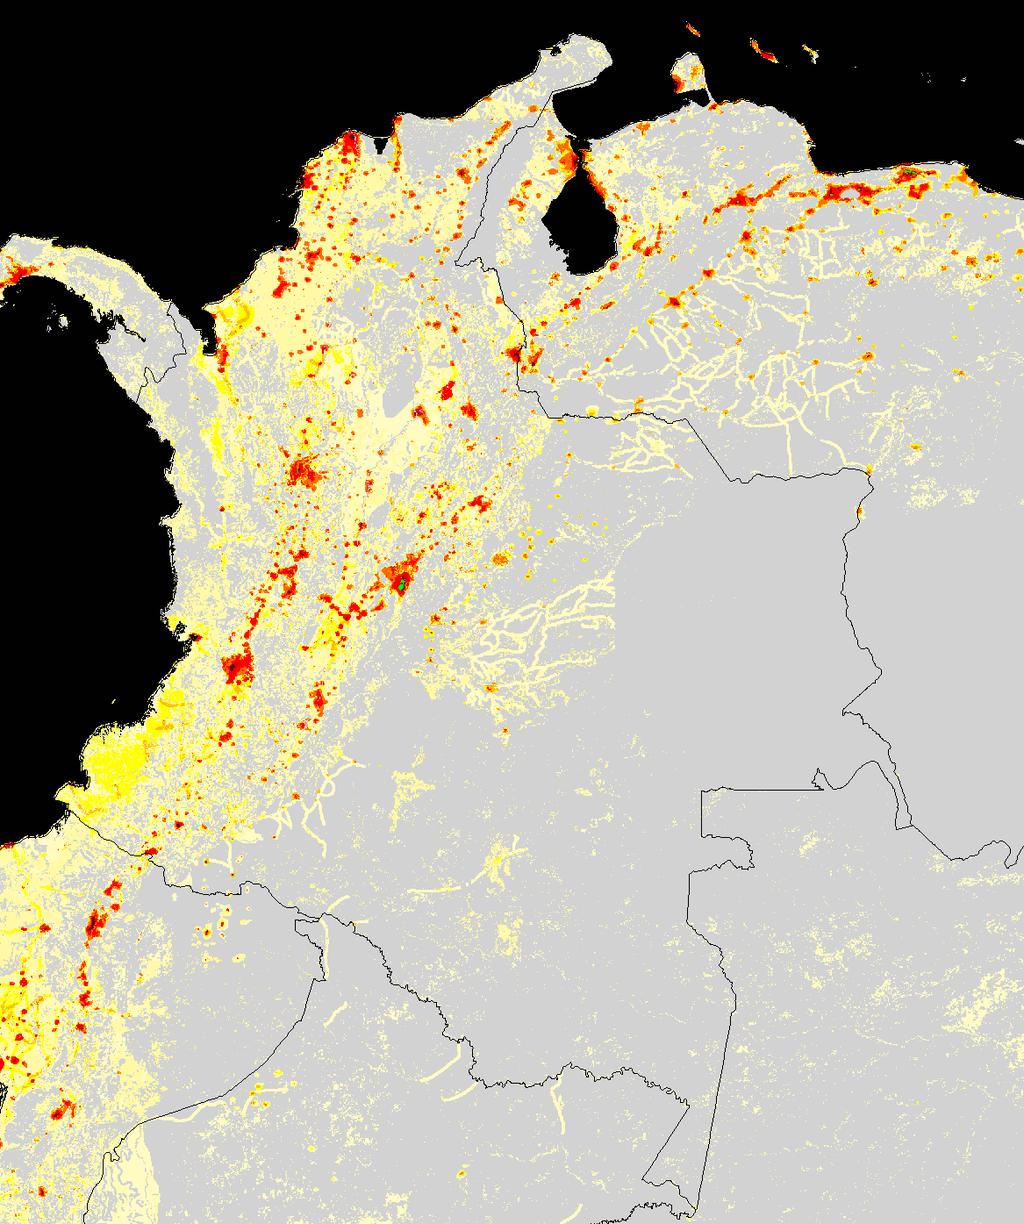 APPENDIX D Map of the Population Density in Colombia The population density of Colombia. Red showing concentration of population. This is a file from the Wikimedia Commons.